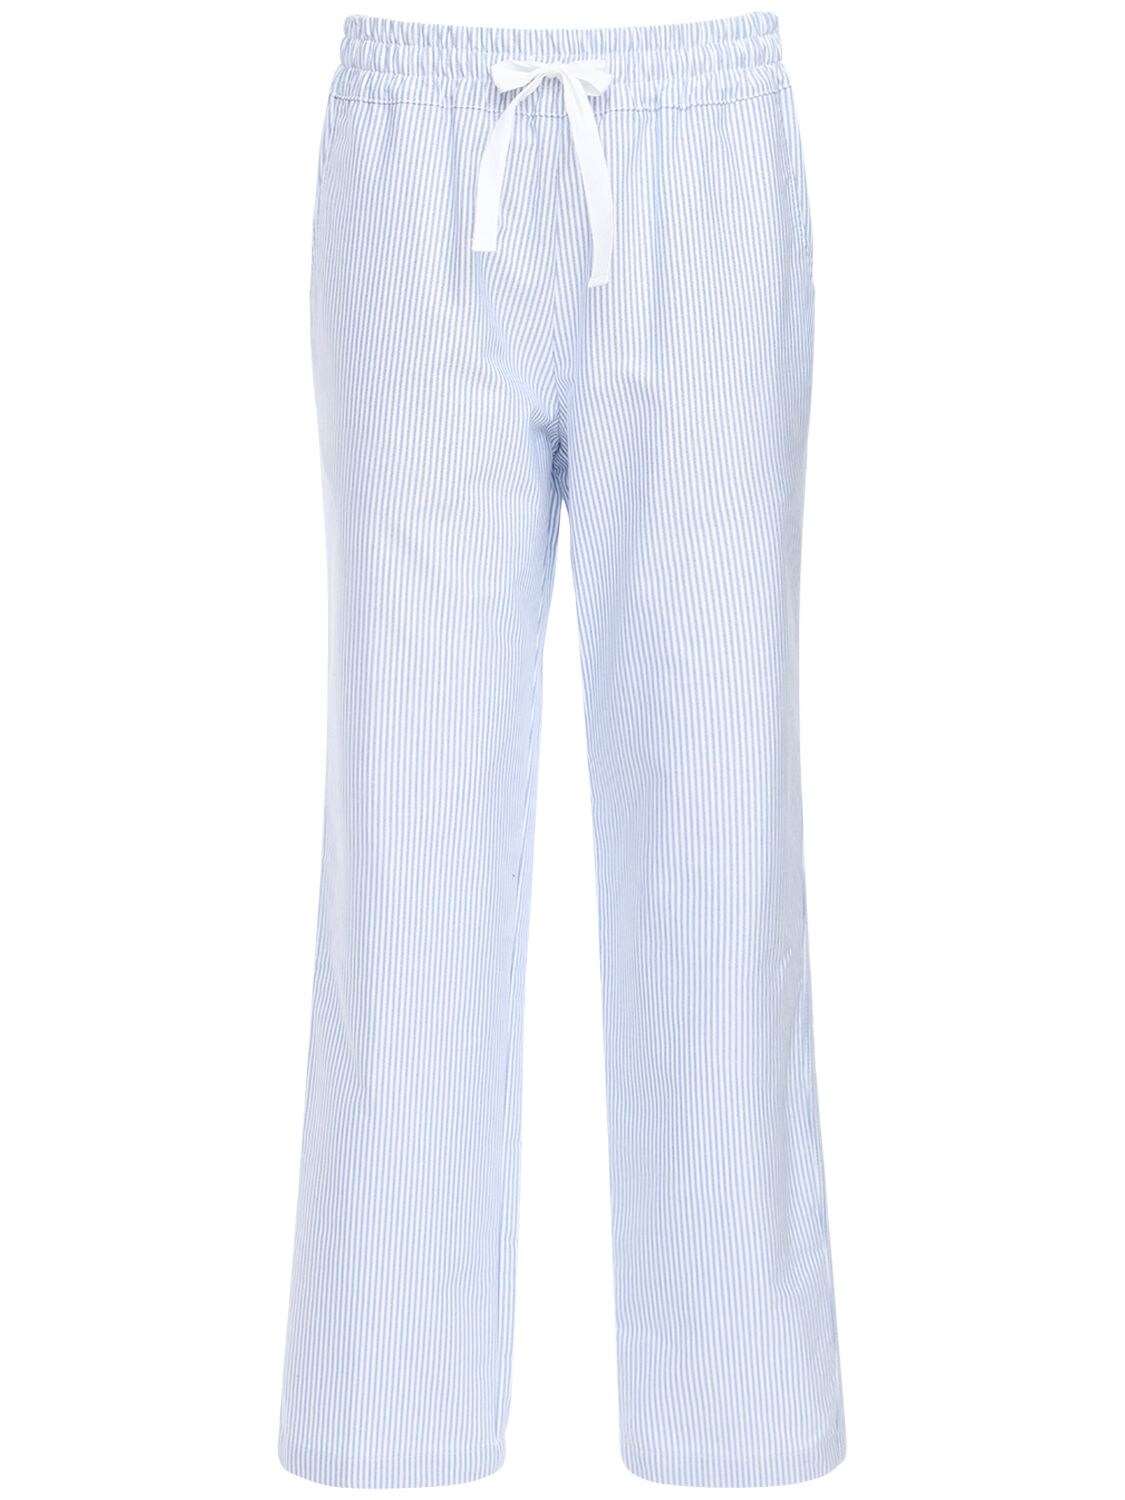 The Sleep Shirt Cotton Flannel Pajama Pants In White,blue